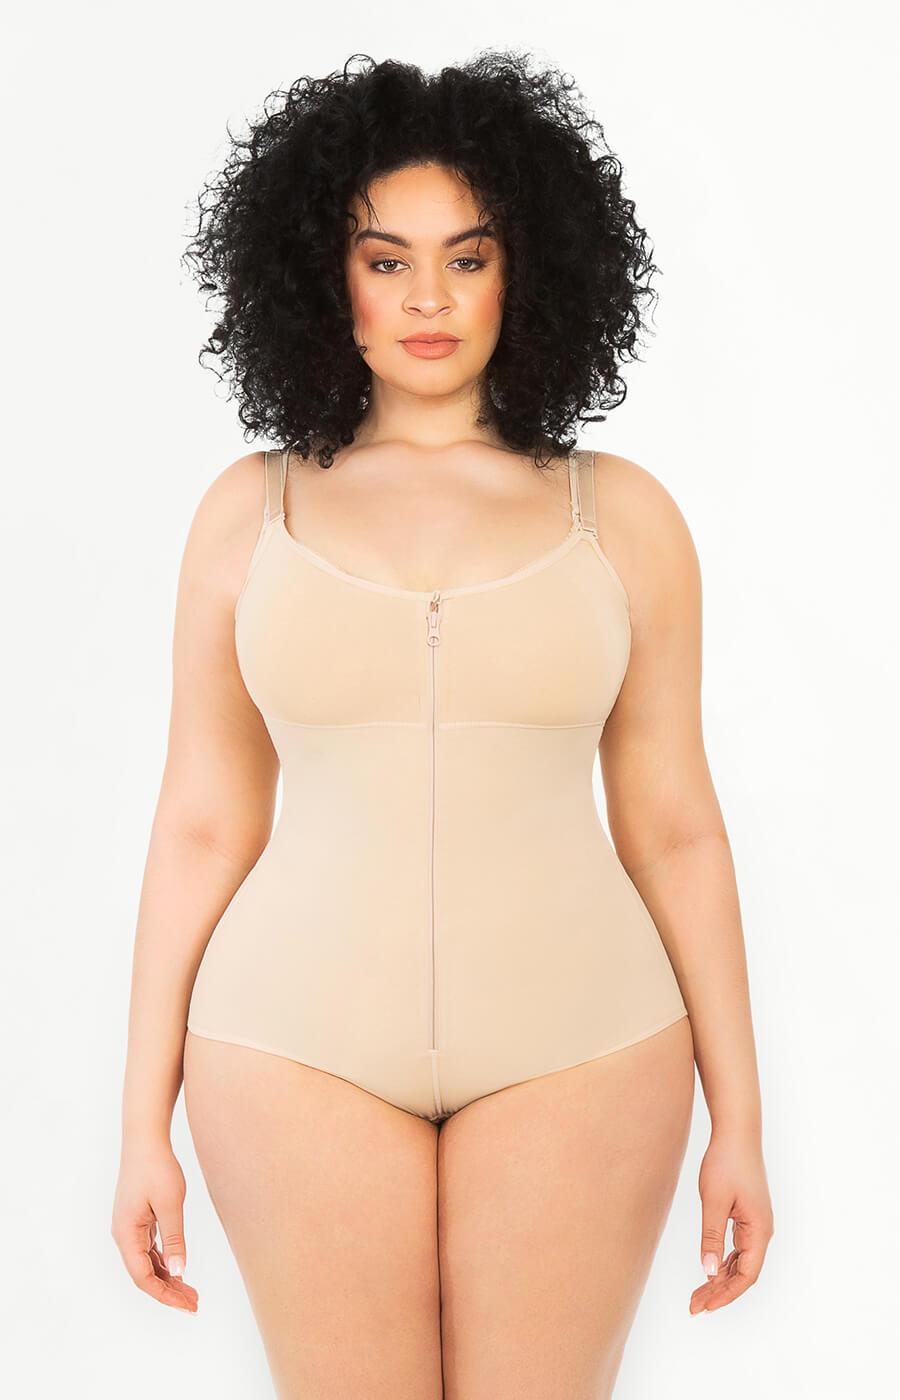 Looking for the Shapewear Black Friday deals 2022? - Stchd